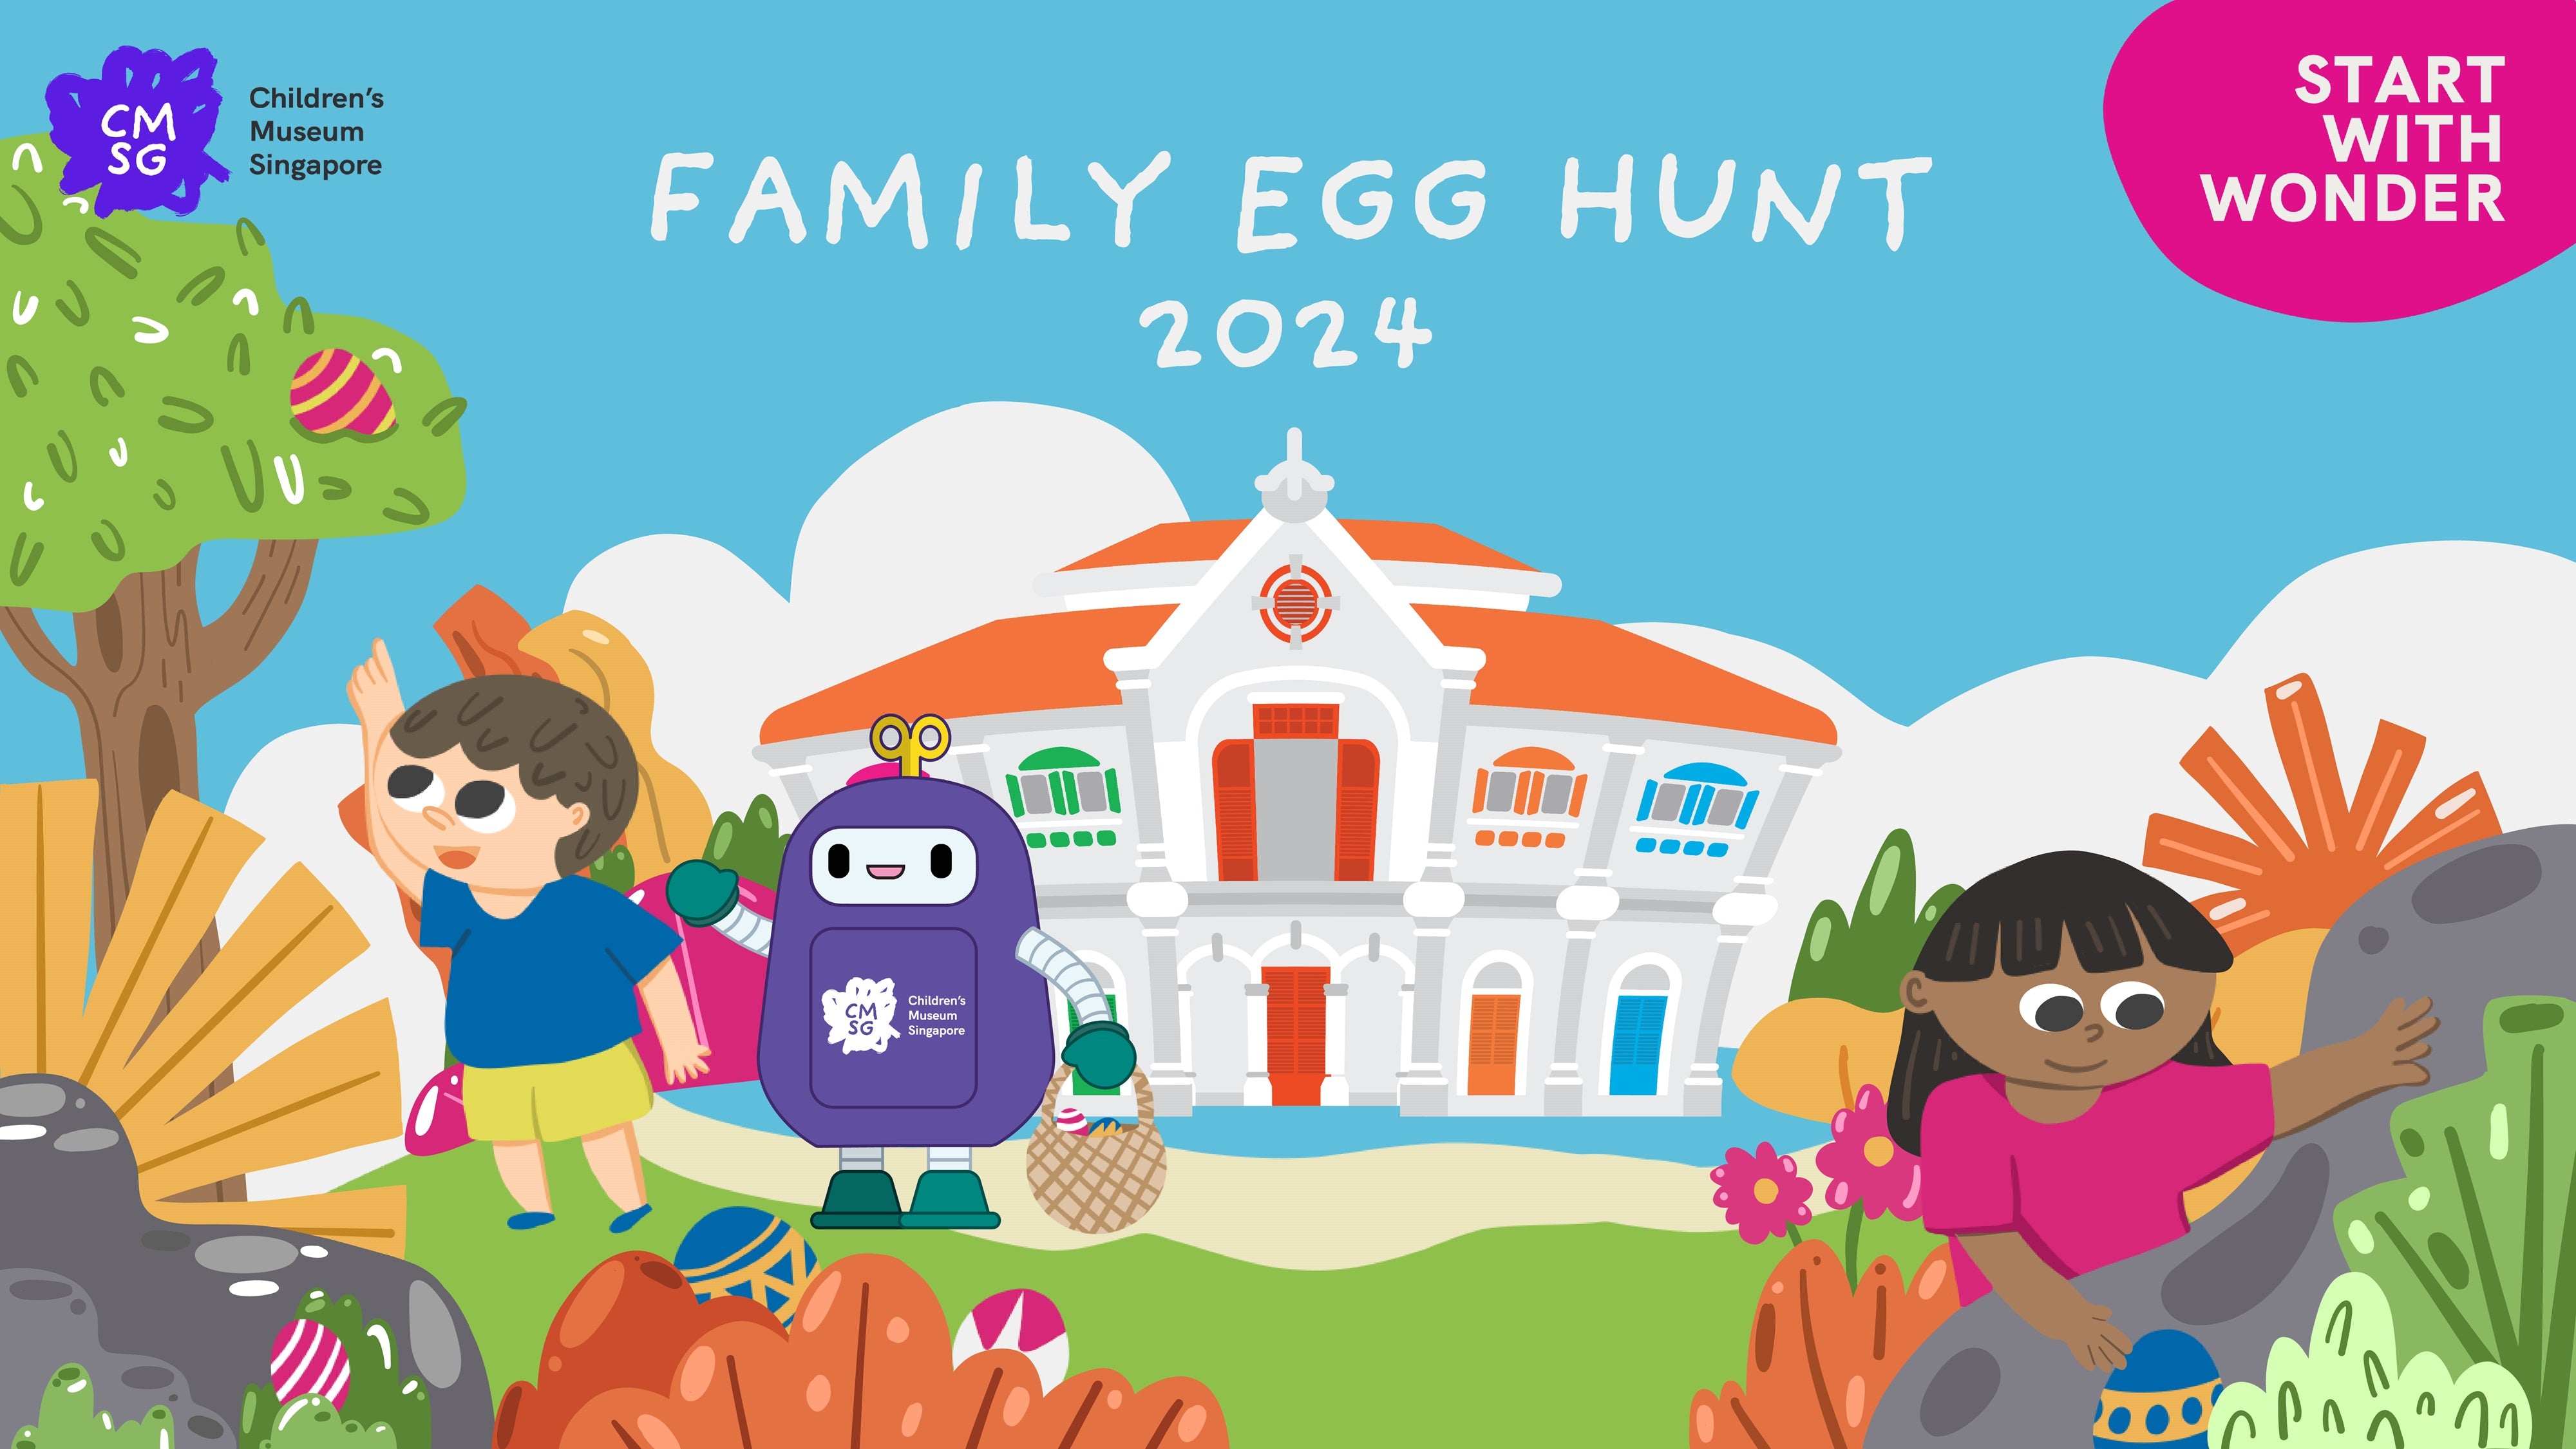 Family Egg Hunt 2024 with the Children's Museum Singapore